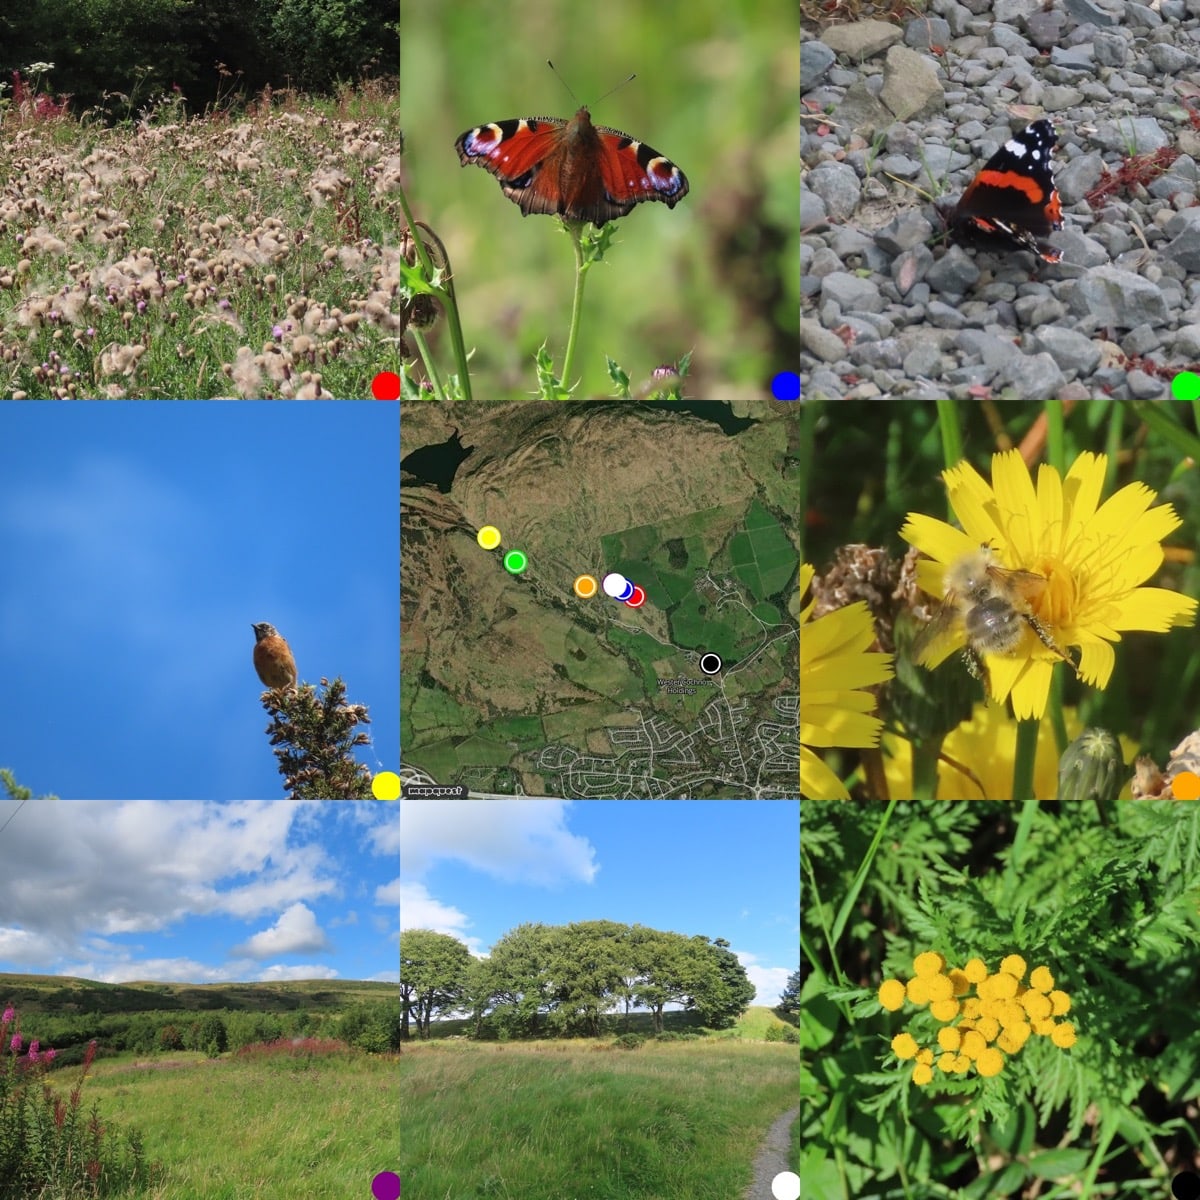 Grid of 3x3 images, 8 photos around a map showing where they were taken. from top left: Thistle down; peacock butterfly; red admiral butterfly; stonechat on gorse against a blue sky; map; honey bee on hawkweed; view, sky with cumulus clouds, trees, and grass; mature line of trees; tansy flower